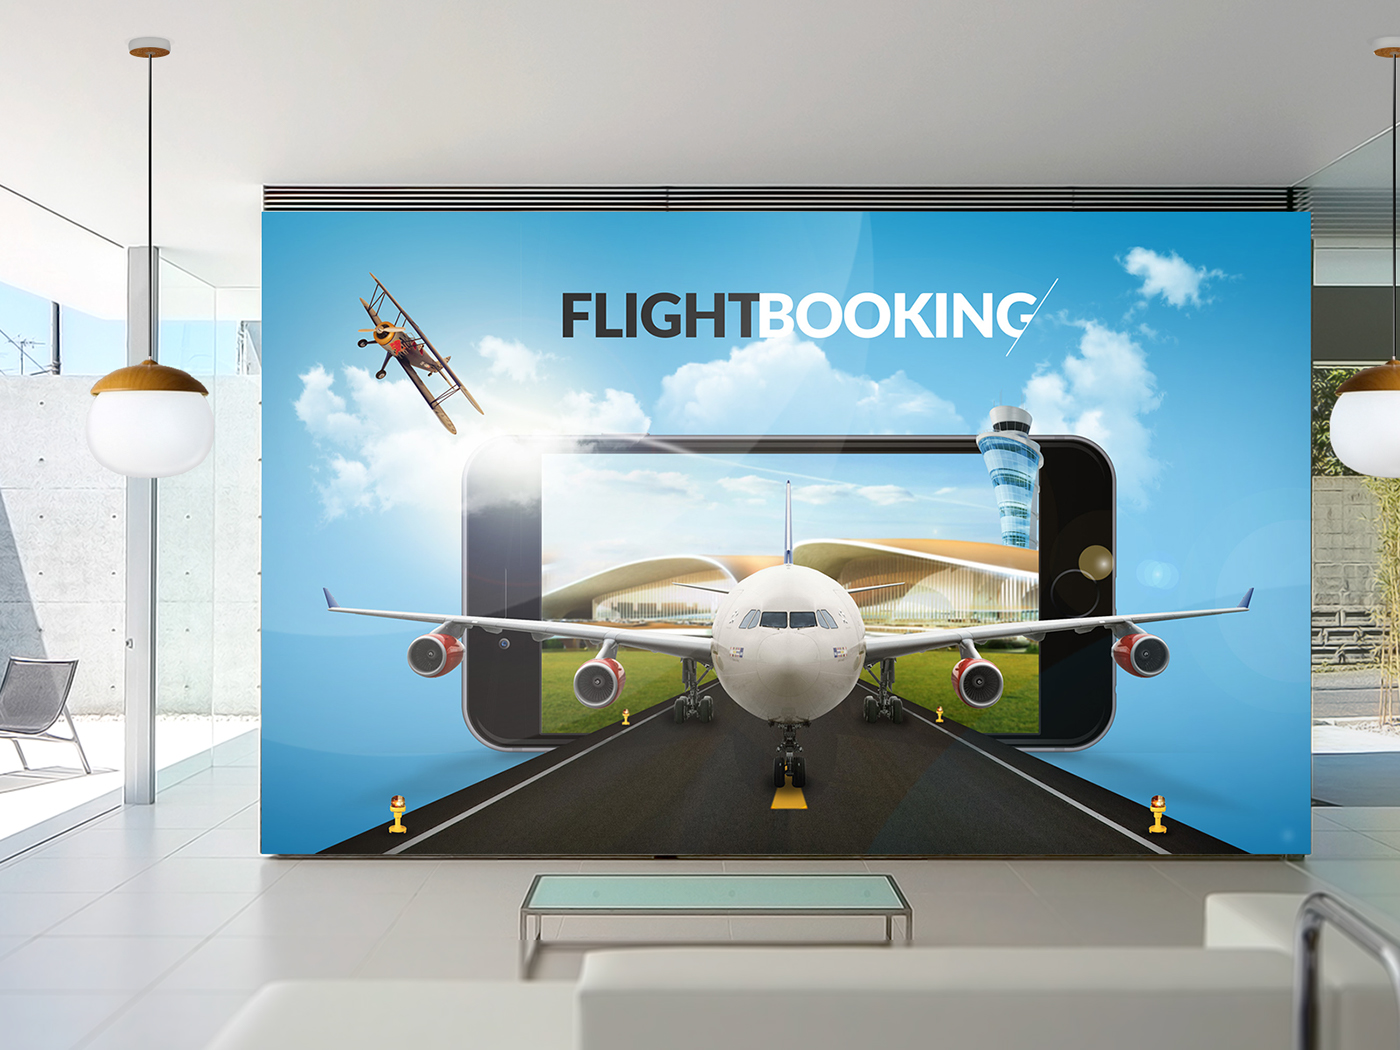 airline Booking flight graphics iphone ad marketing   me2ahmedhassan